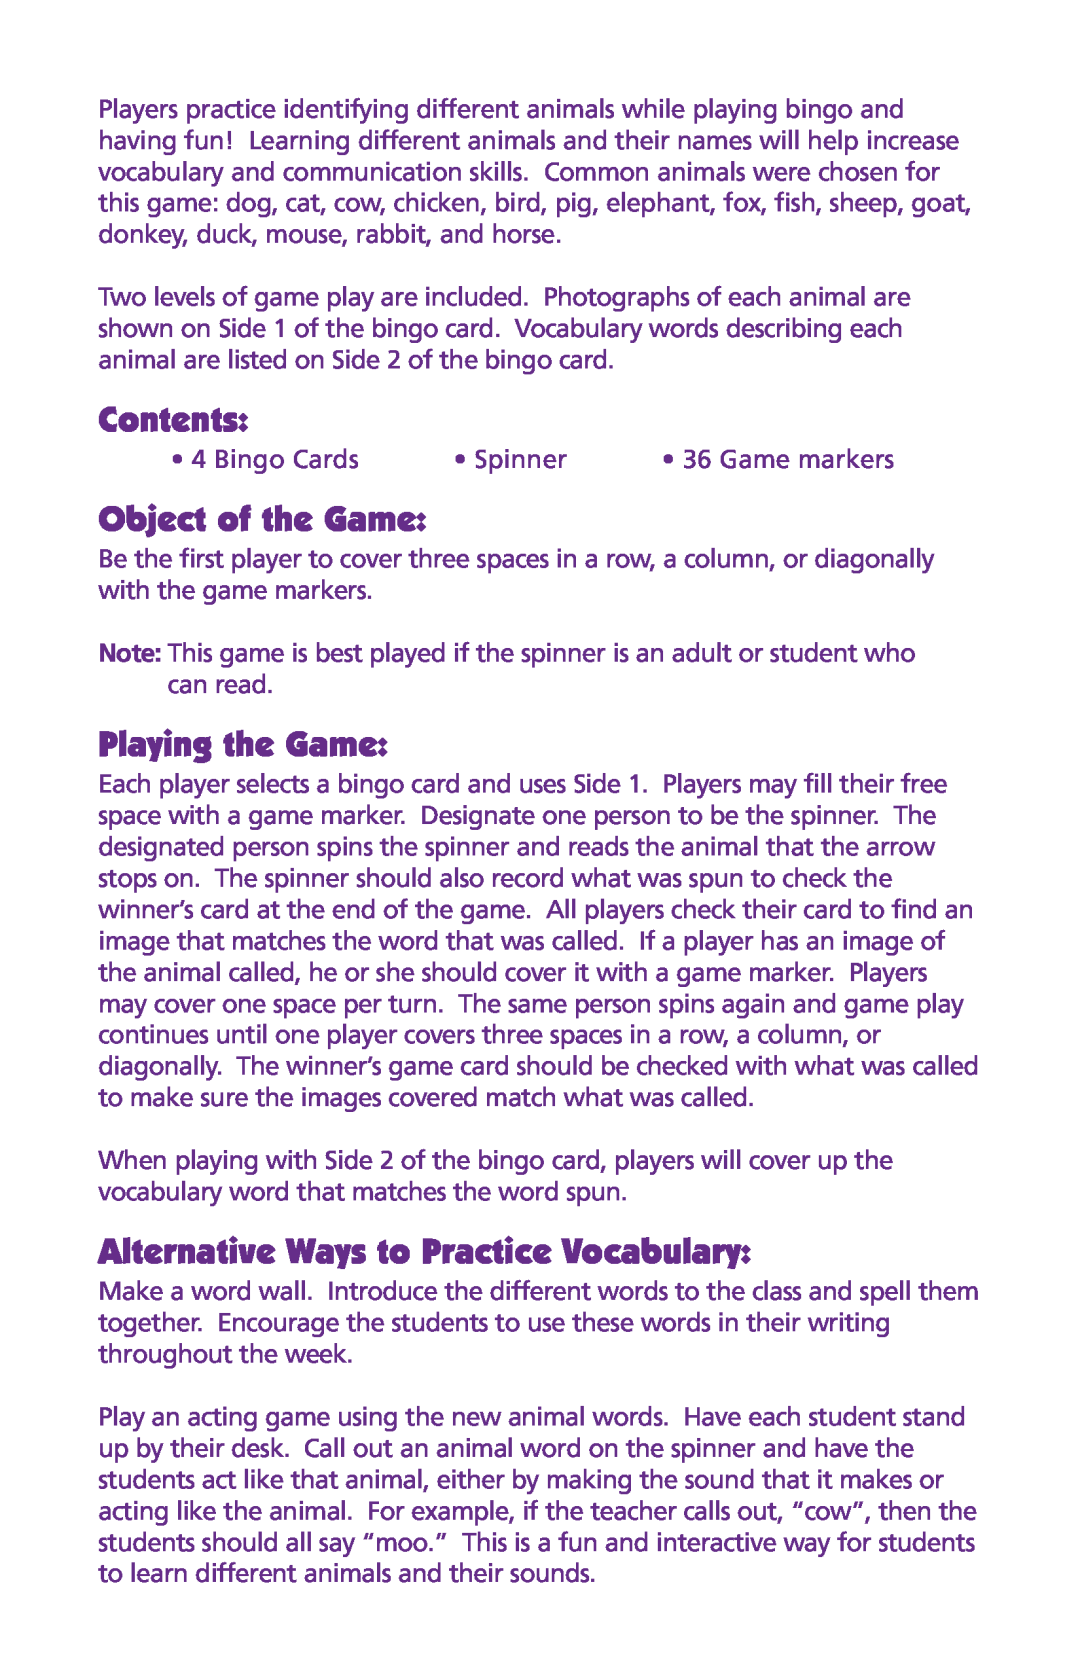 Learning Resources LER5994 manual Contents, Object of the Game, Playing the Game, Alternative Ways to Practice Vocabulary 